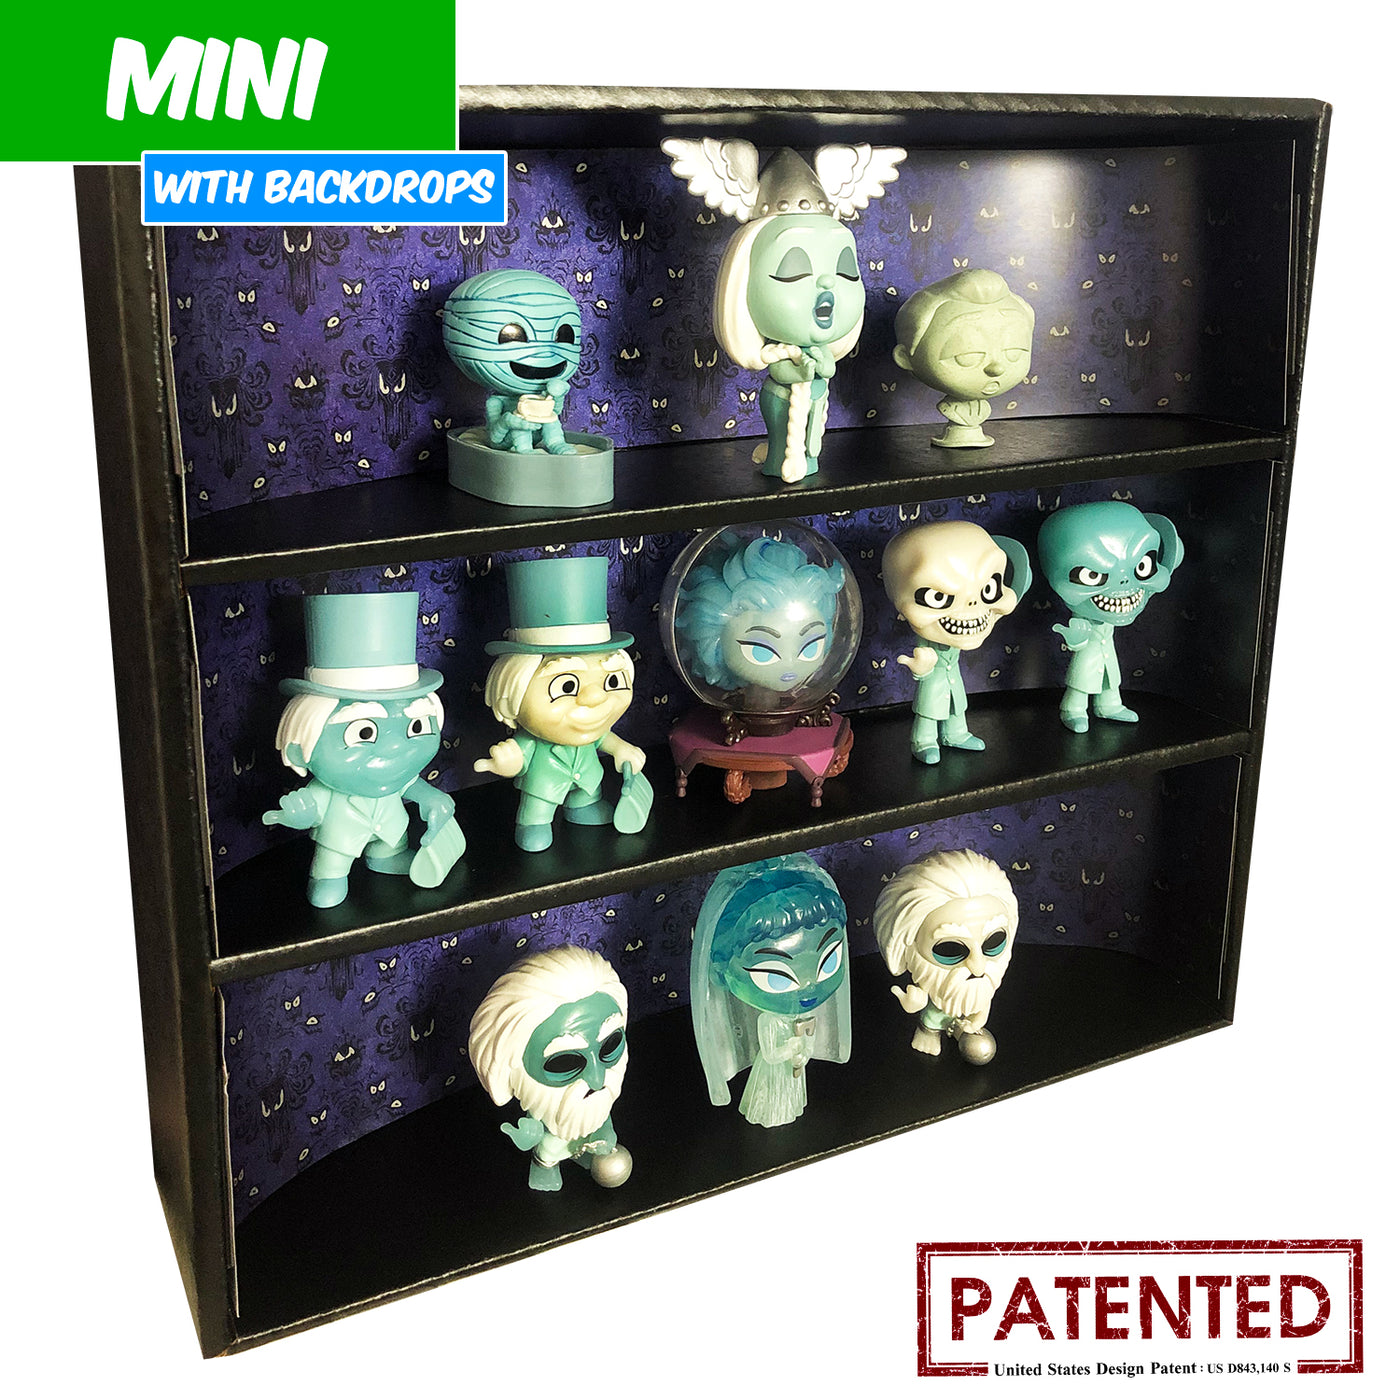 HAUNTED MANSION - MINI Display Case for Small Toys with 3 Backdrop Inserts, Corrugated Cardboard - Display Geek